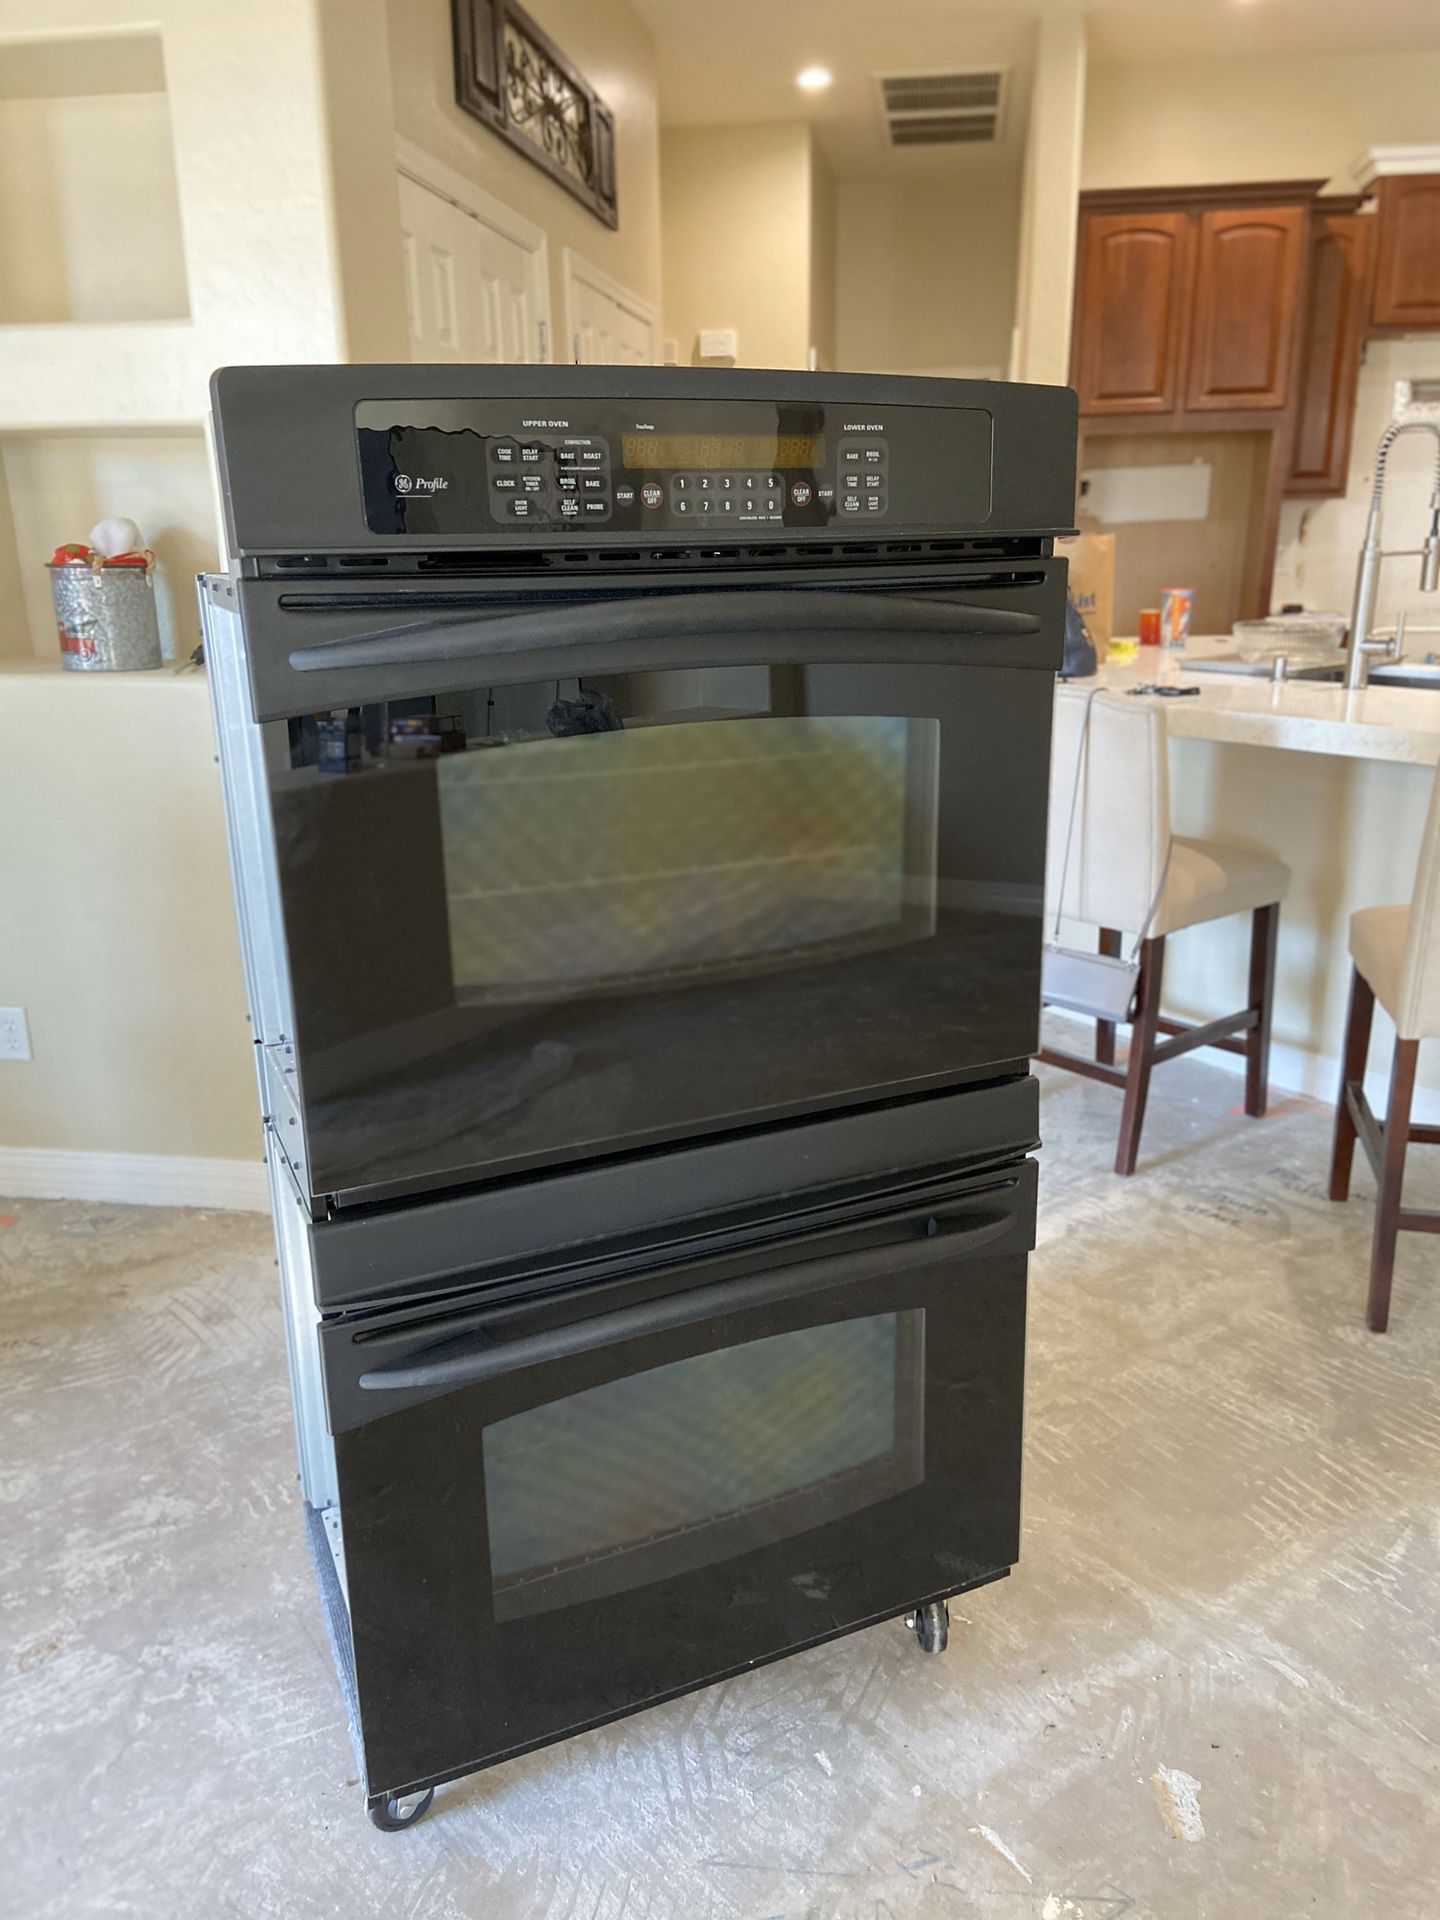 GE Profile Double Oven + Convection 2008 Like New Condition